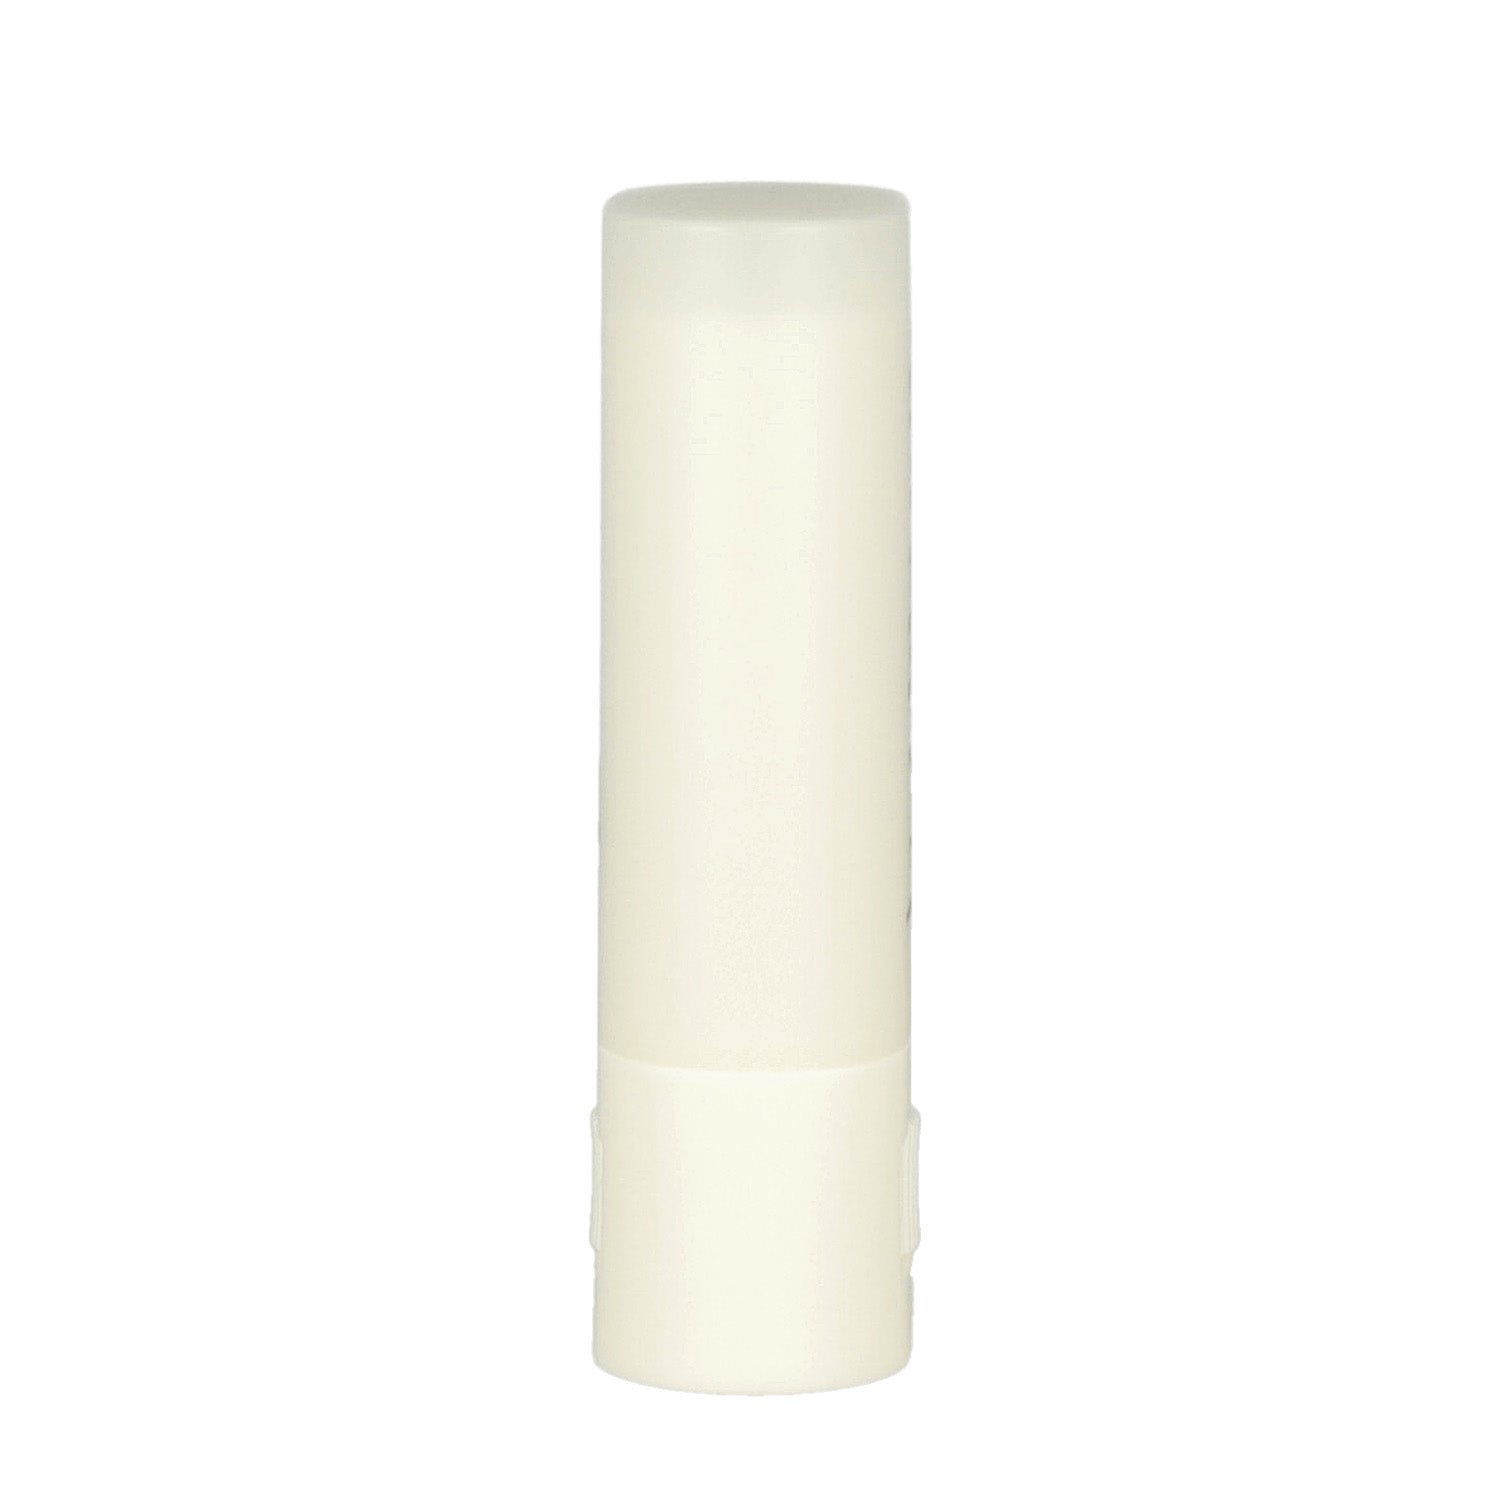 Beauty of Joseon Matte Sun Stick: 18g, with Mugwort and Camelia for sun care.